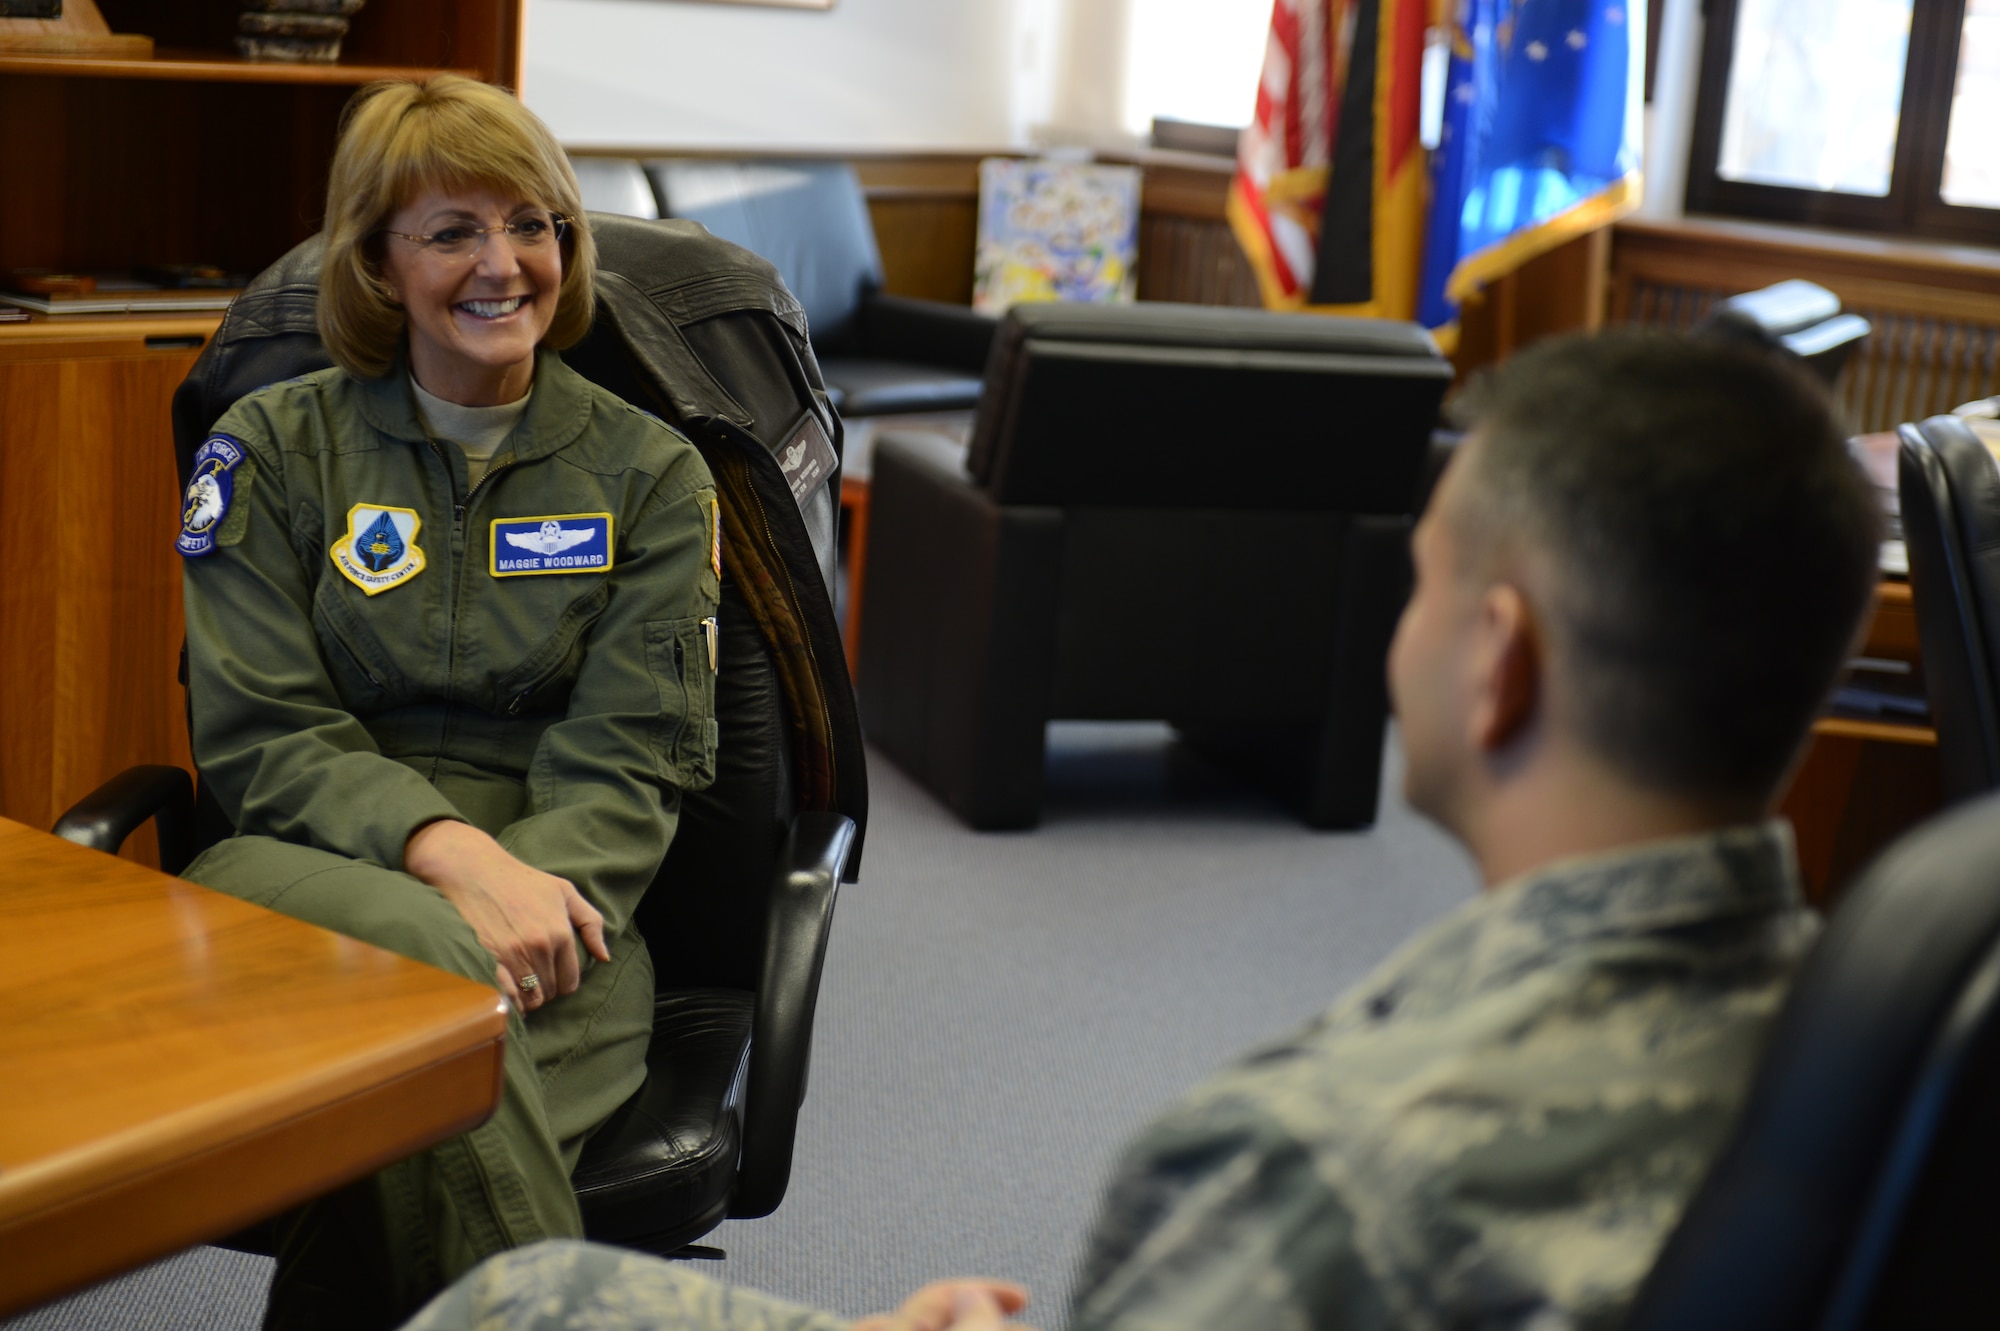 SPANGDAHLEM AIR BASE, Germany – U.S. Air Force Maj. Gen. Margaret Woodward, Air Force Chief of Safety, speaks with Col. David Julazadeh, 52nd Fighter Wing commander, in the 52nd FW headquarters building Dec. 12, 2012. Woodward toured Spangdahlem AB to familiarize herself with daily 52nd FW safety operations. (U.S. Air Force photo by Airman 1st Class Gustavo Castillo/Released)